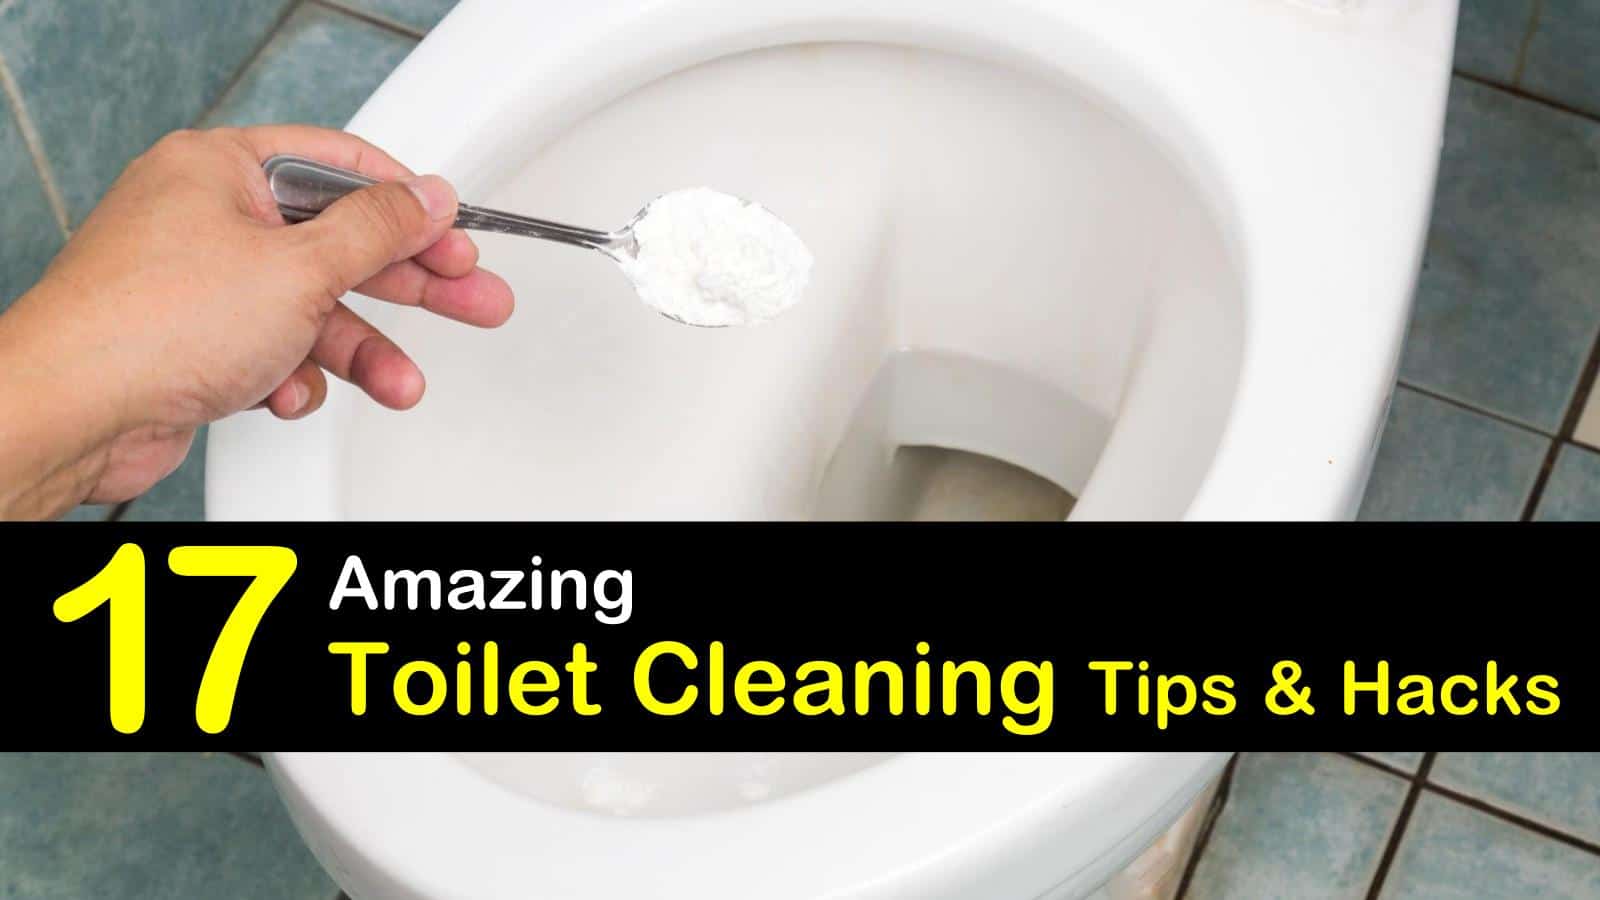 5 Amazing Ways to Clean a Toilet